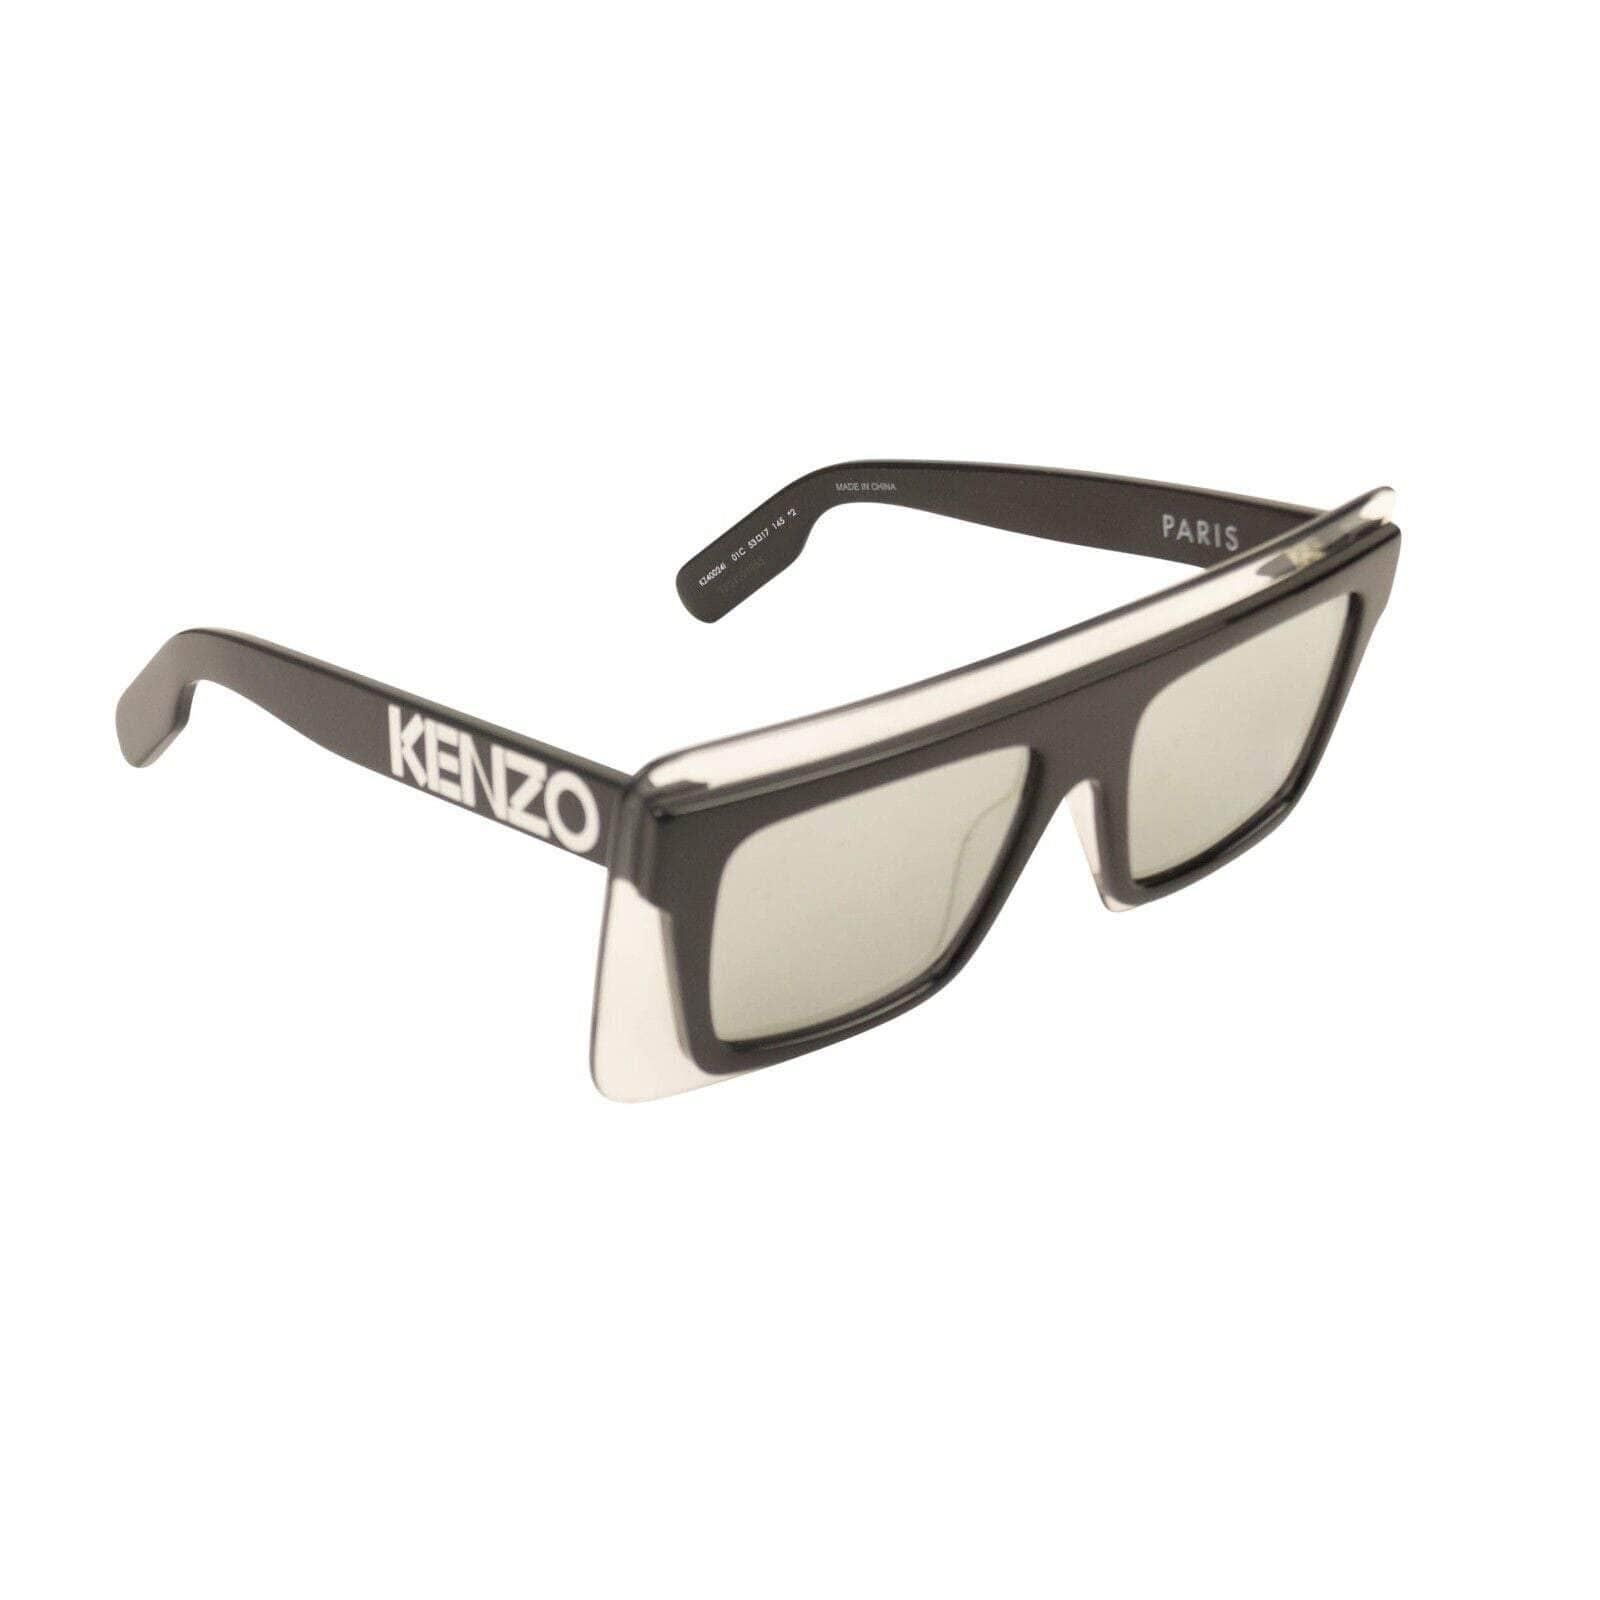 Kenzo Paris channelenable-all, chicmi, couponcollection, gender-mens, gender-womens, kenzo-paris, main-accessories, mens-shoes, size-os, under-250, unisex-eyewear OS Black Translucent Mirror Acetate Sunglasses 95-KNZ-3032/OS 95-KNZ-3032/OS